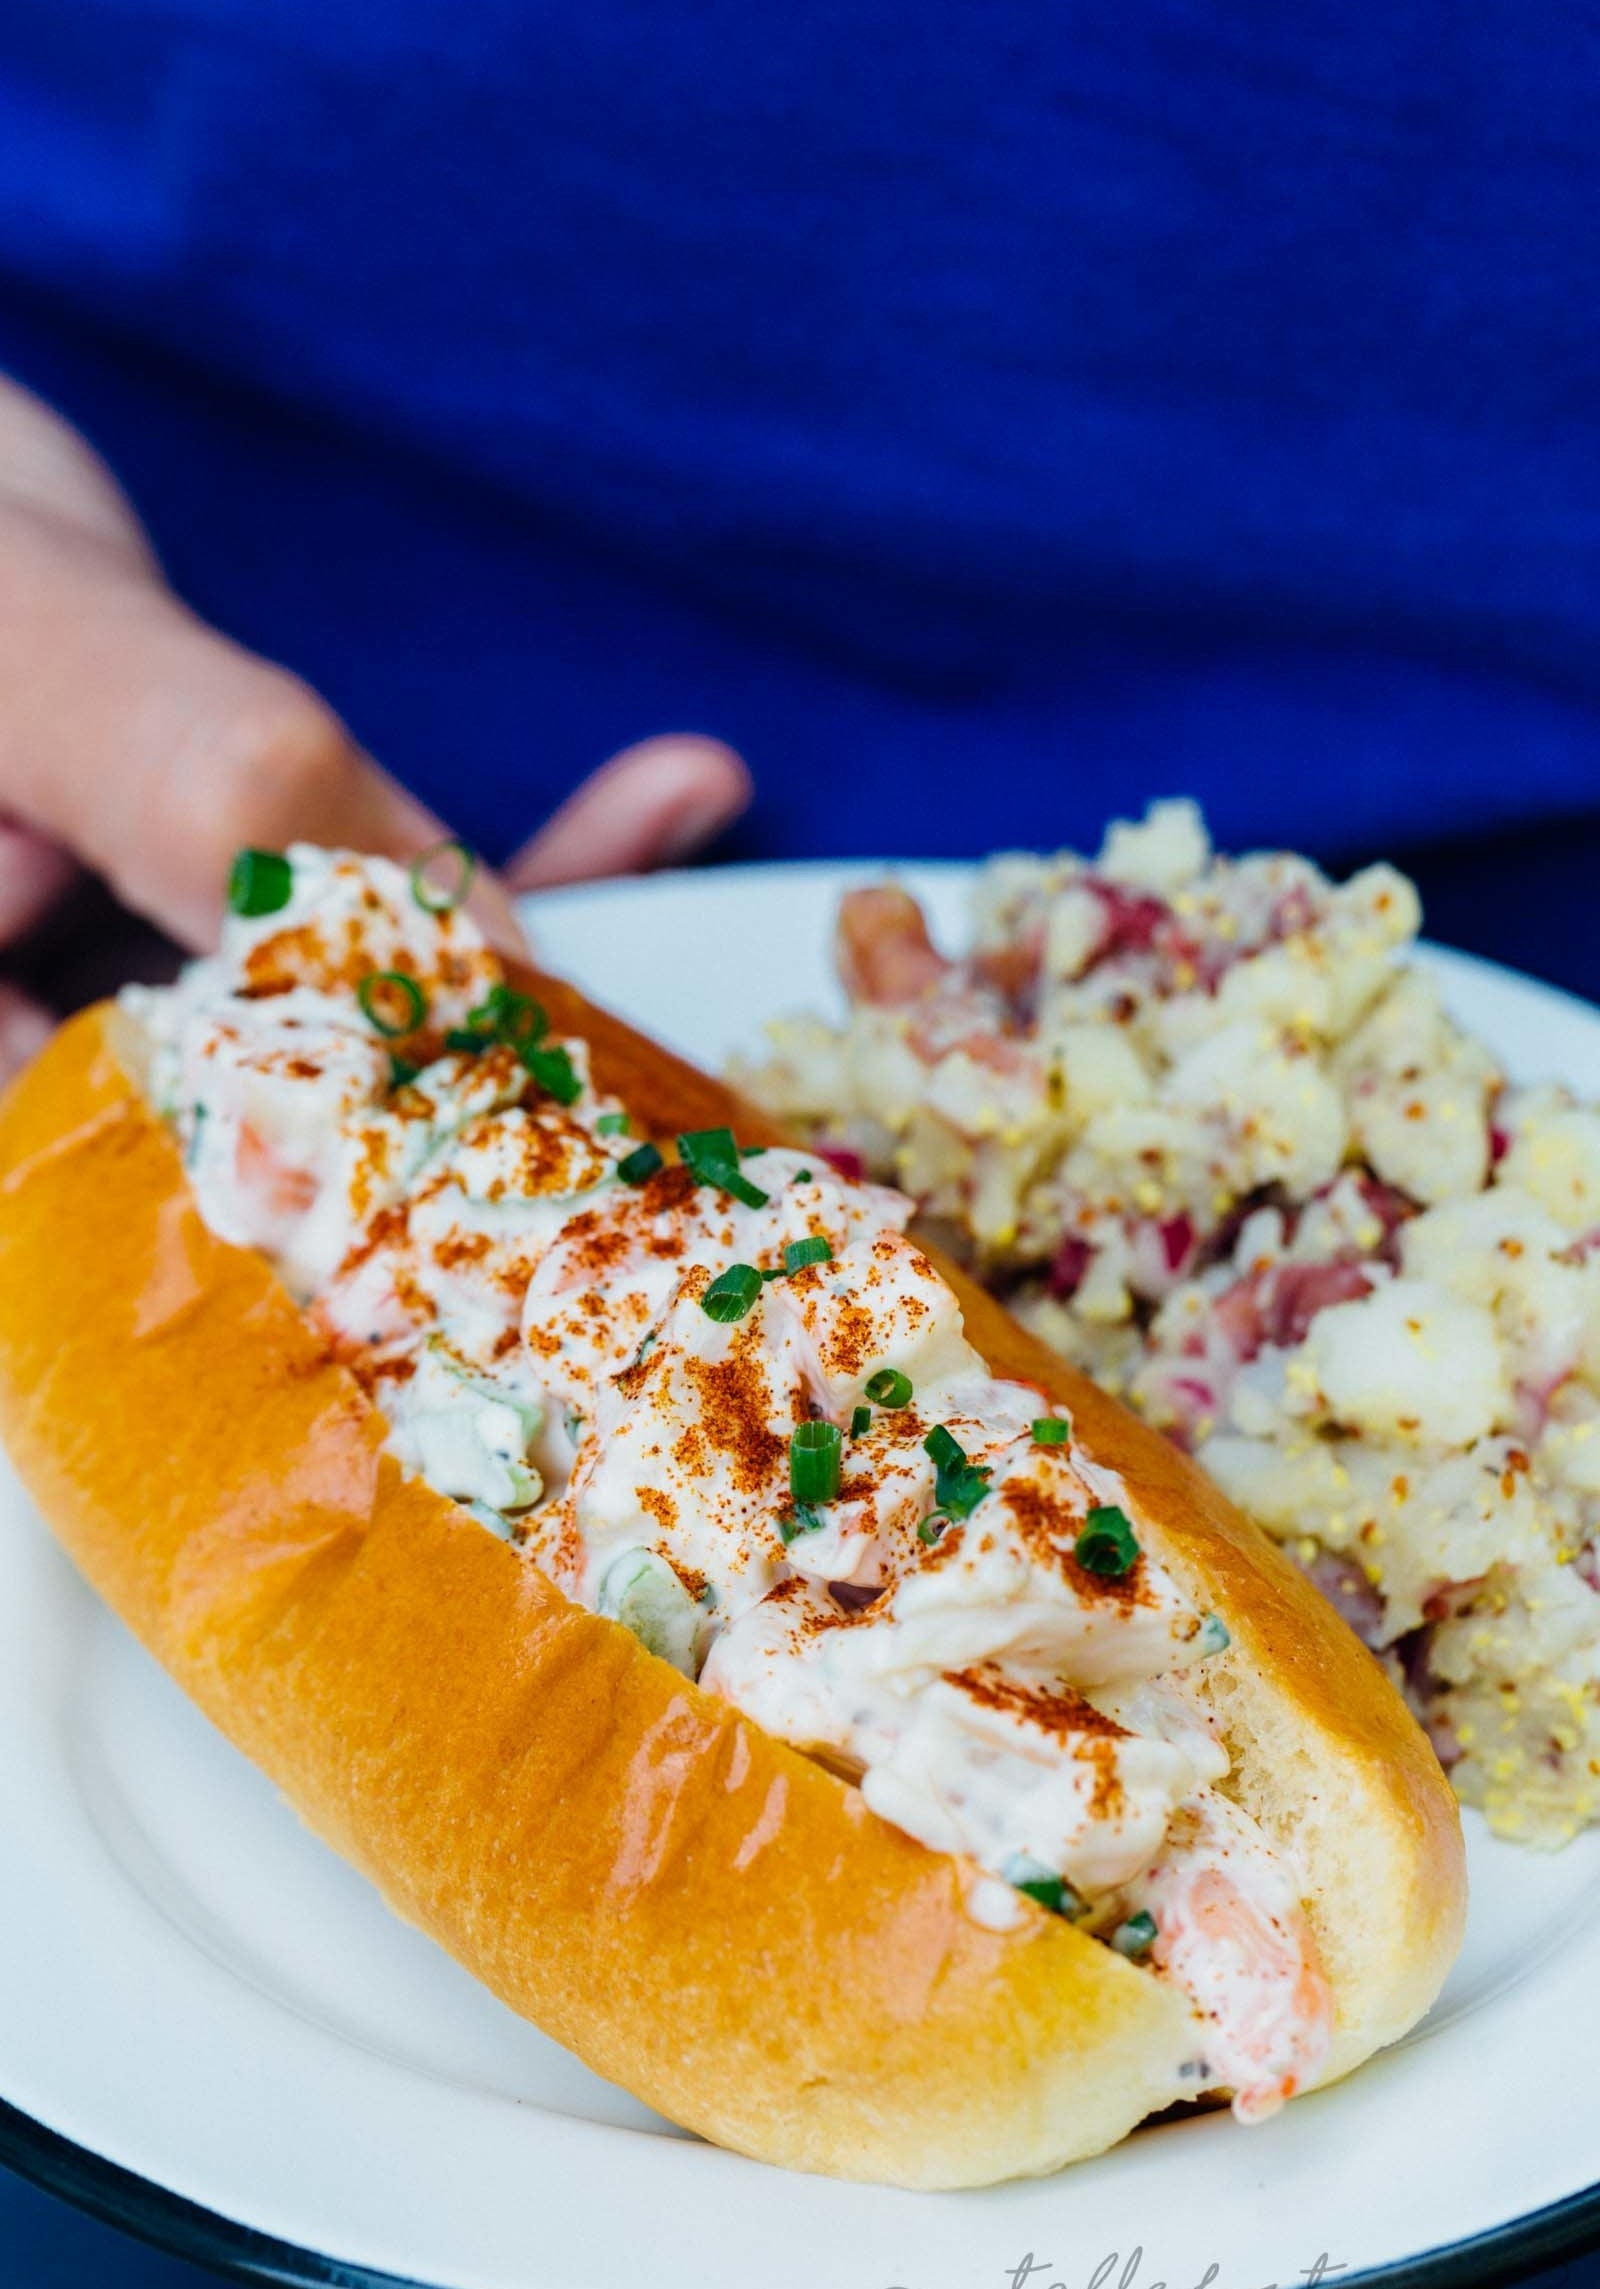 A hot dog roll filled with shrimp tossed in a mayo-based dressing with chives and potato salad on the side.